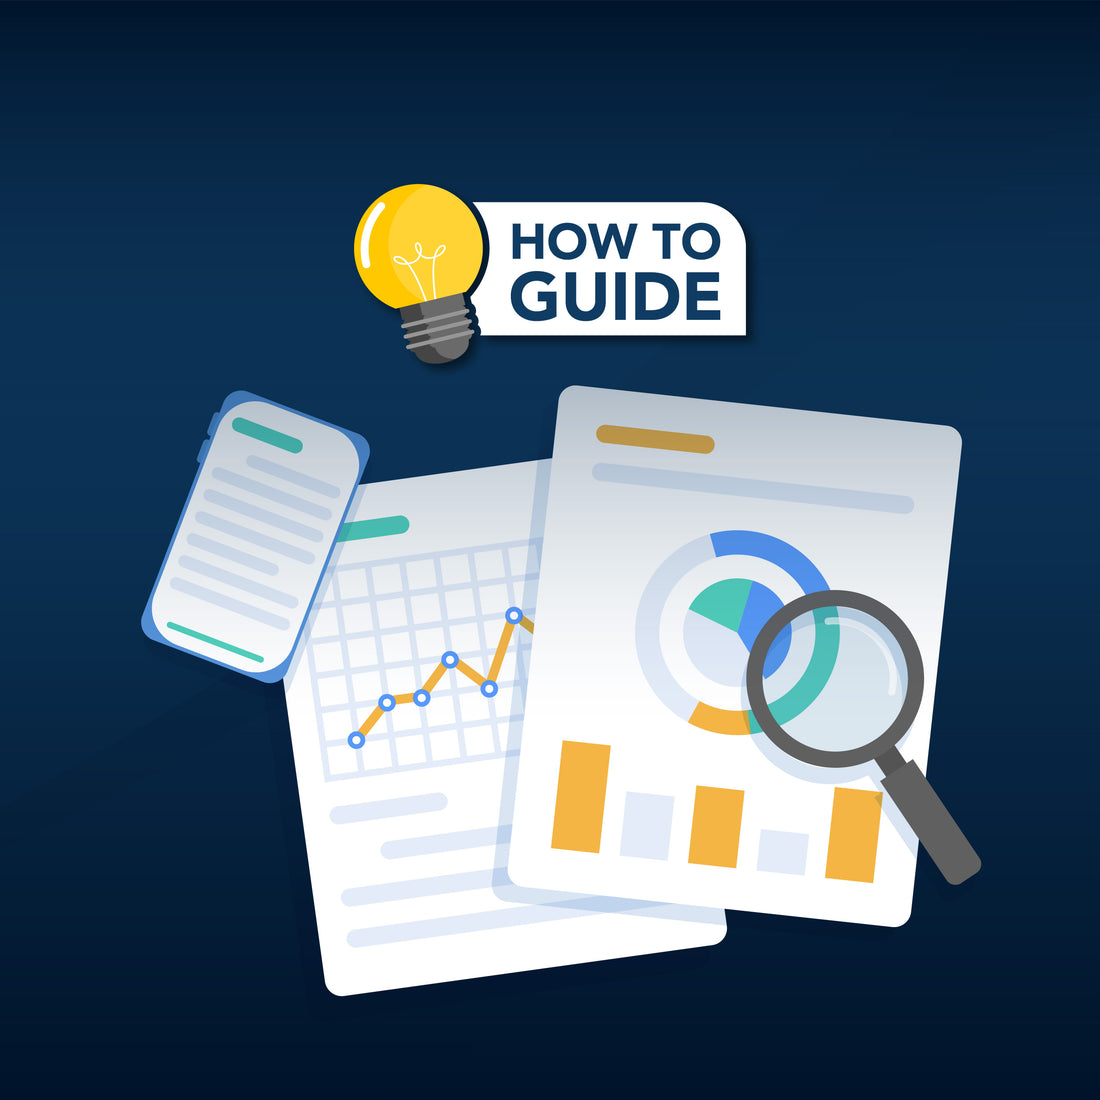 A Quick Guide to Writing a Case Study